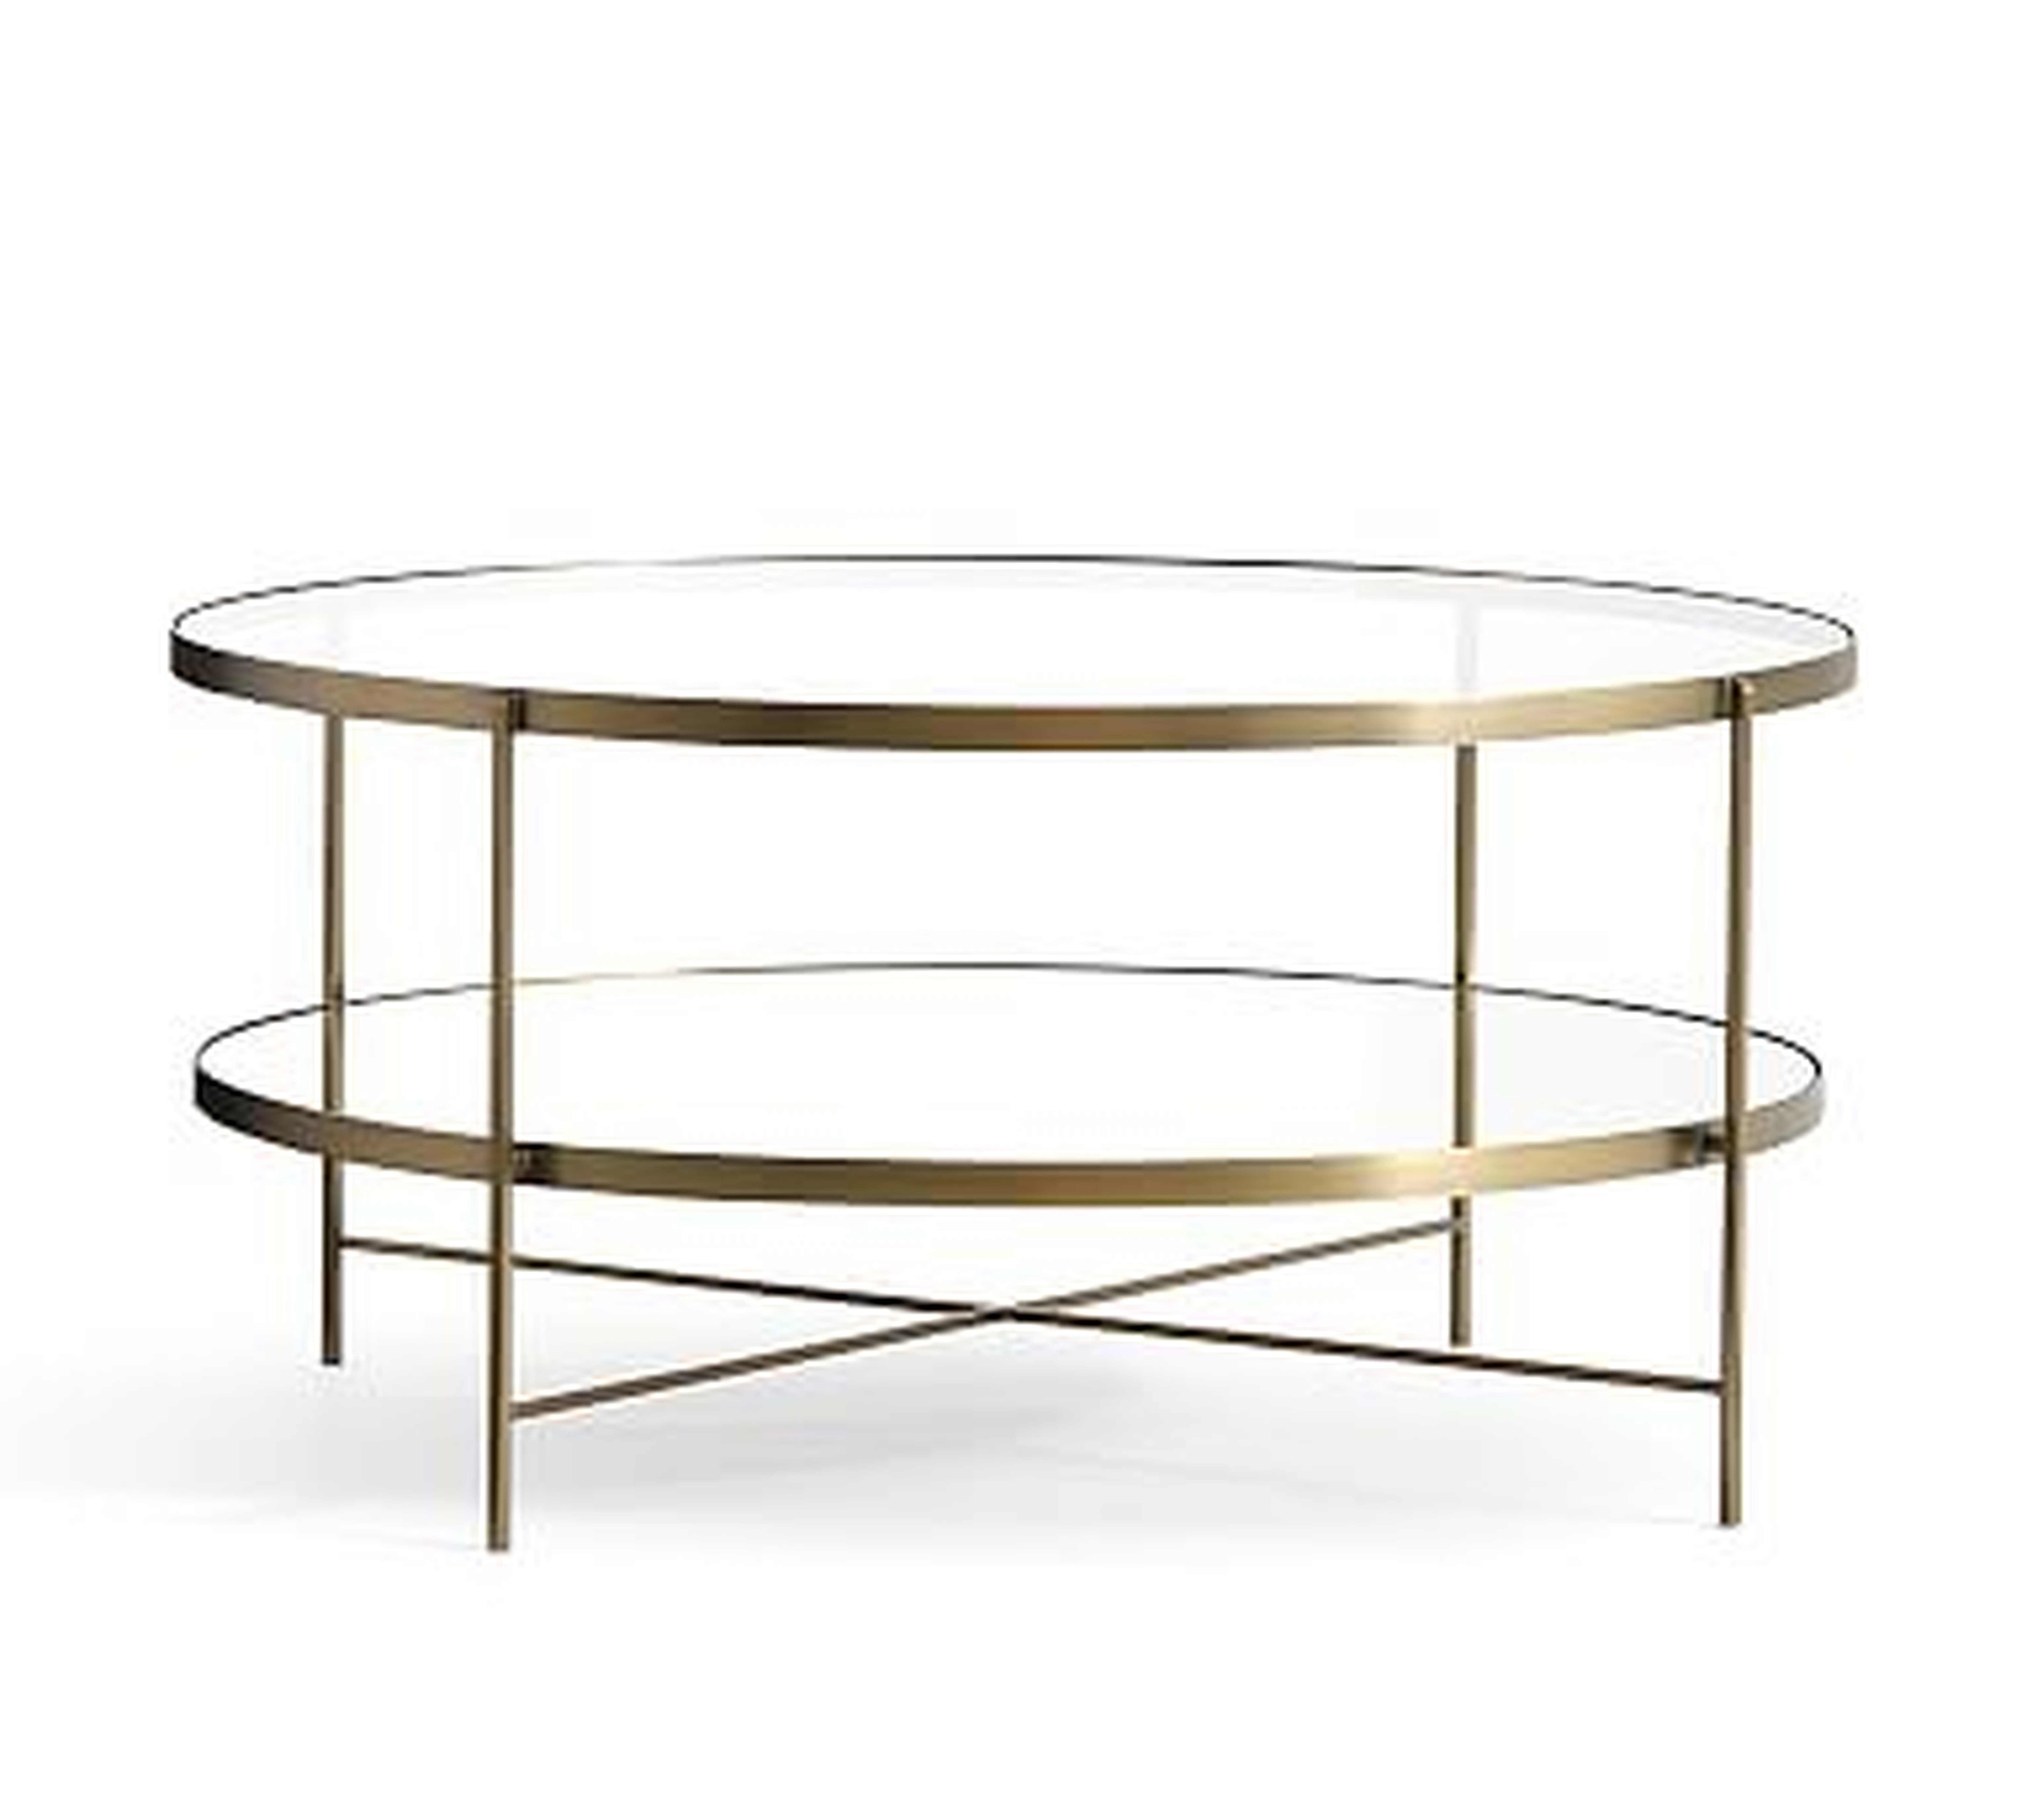 DISCONTINUED Leona Round Coffee Table, Brass - Pottery Barn